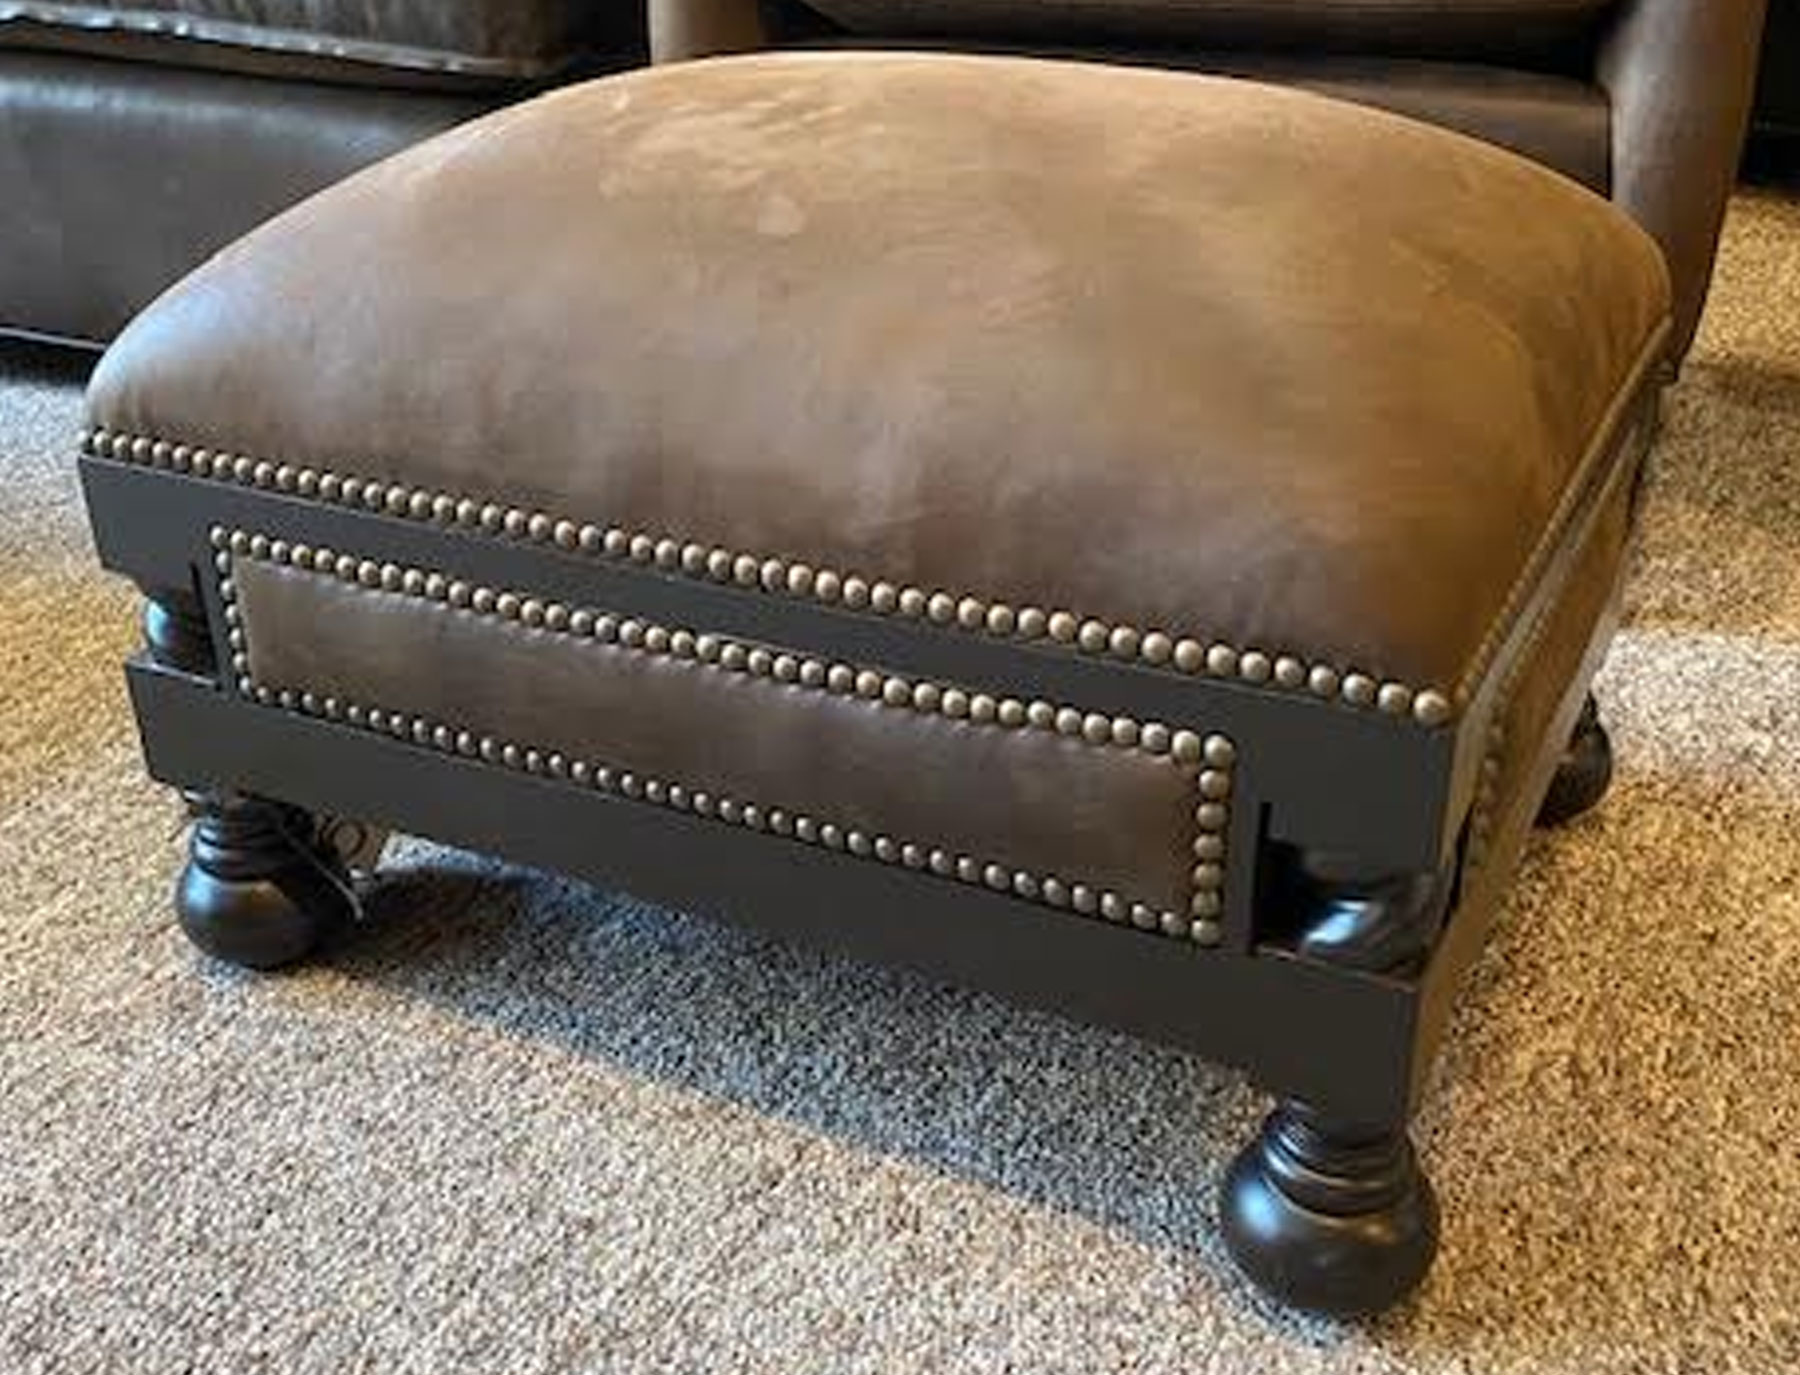 Our House 841 All Hallows Library Ottoman in Aged Cigar Leather